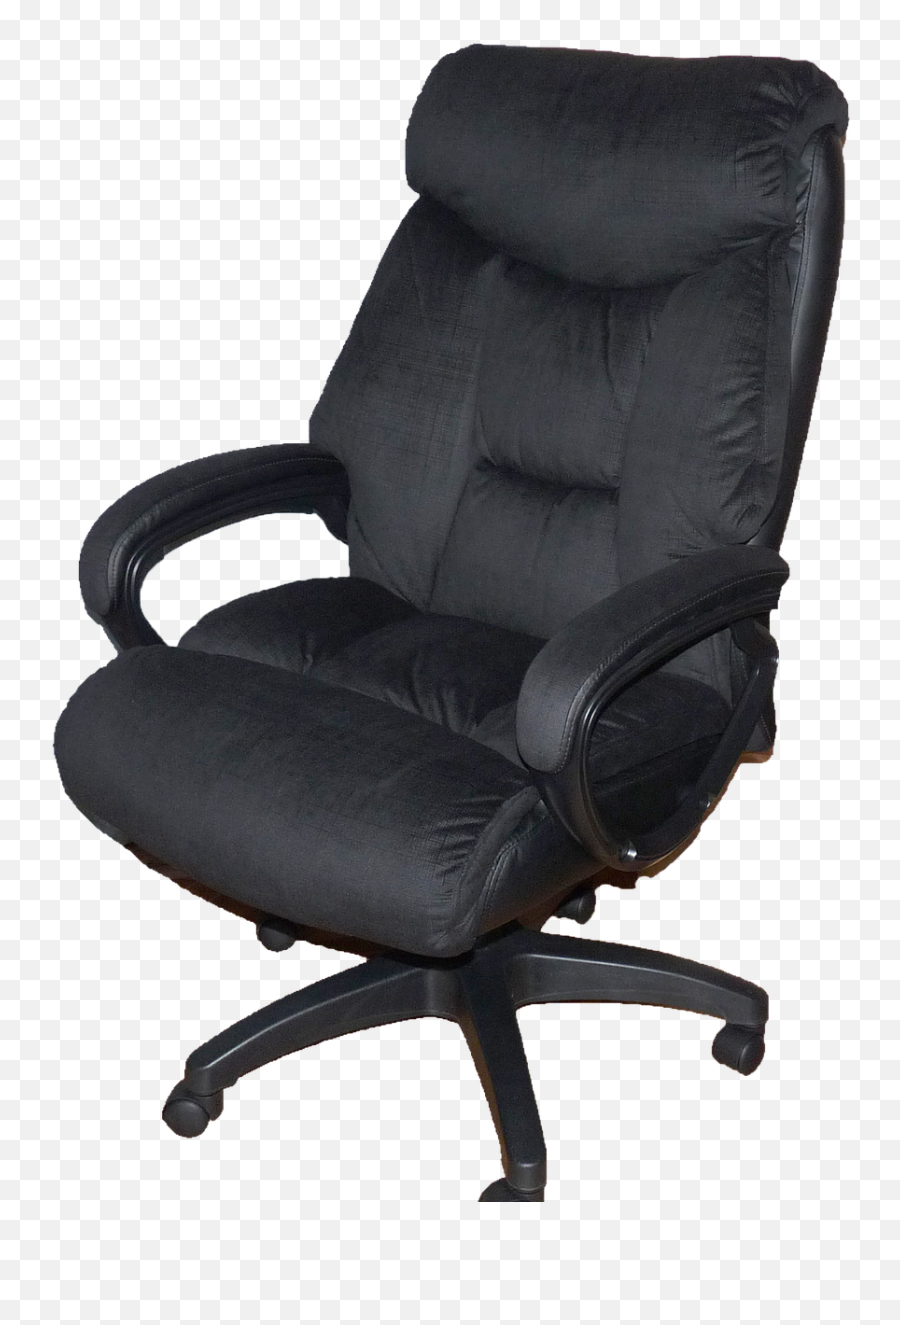 Chair Swivel Office - Free Image On Pixabay Work Chair Png,Seat Png